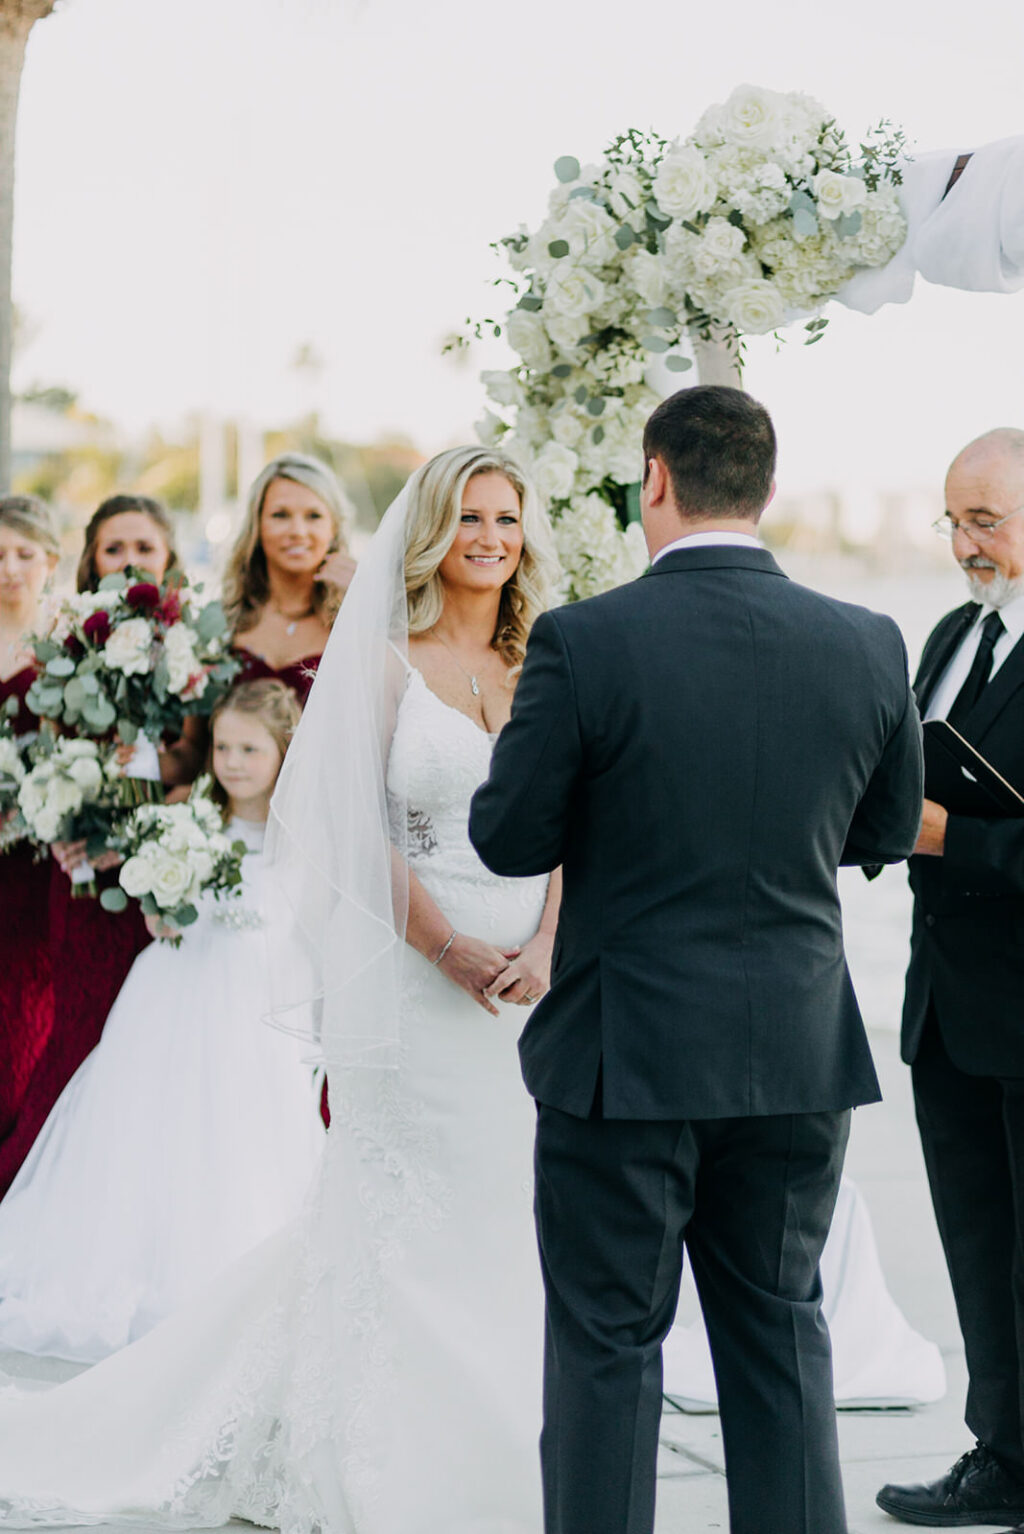 Bride and Groom at the Alter Wedding Portrait | Tampa Wedding Planner Special Moments Event Planning | Amber McWhorter Photography